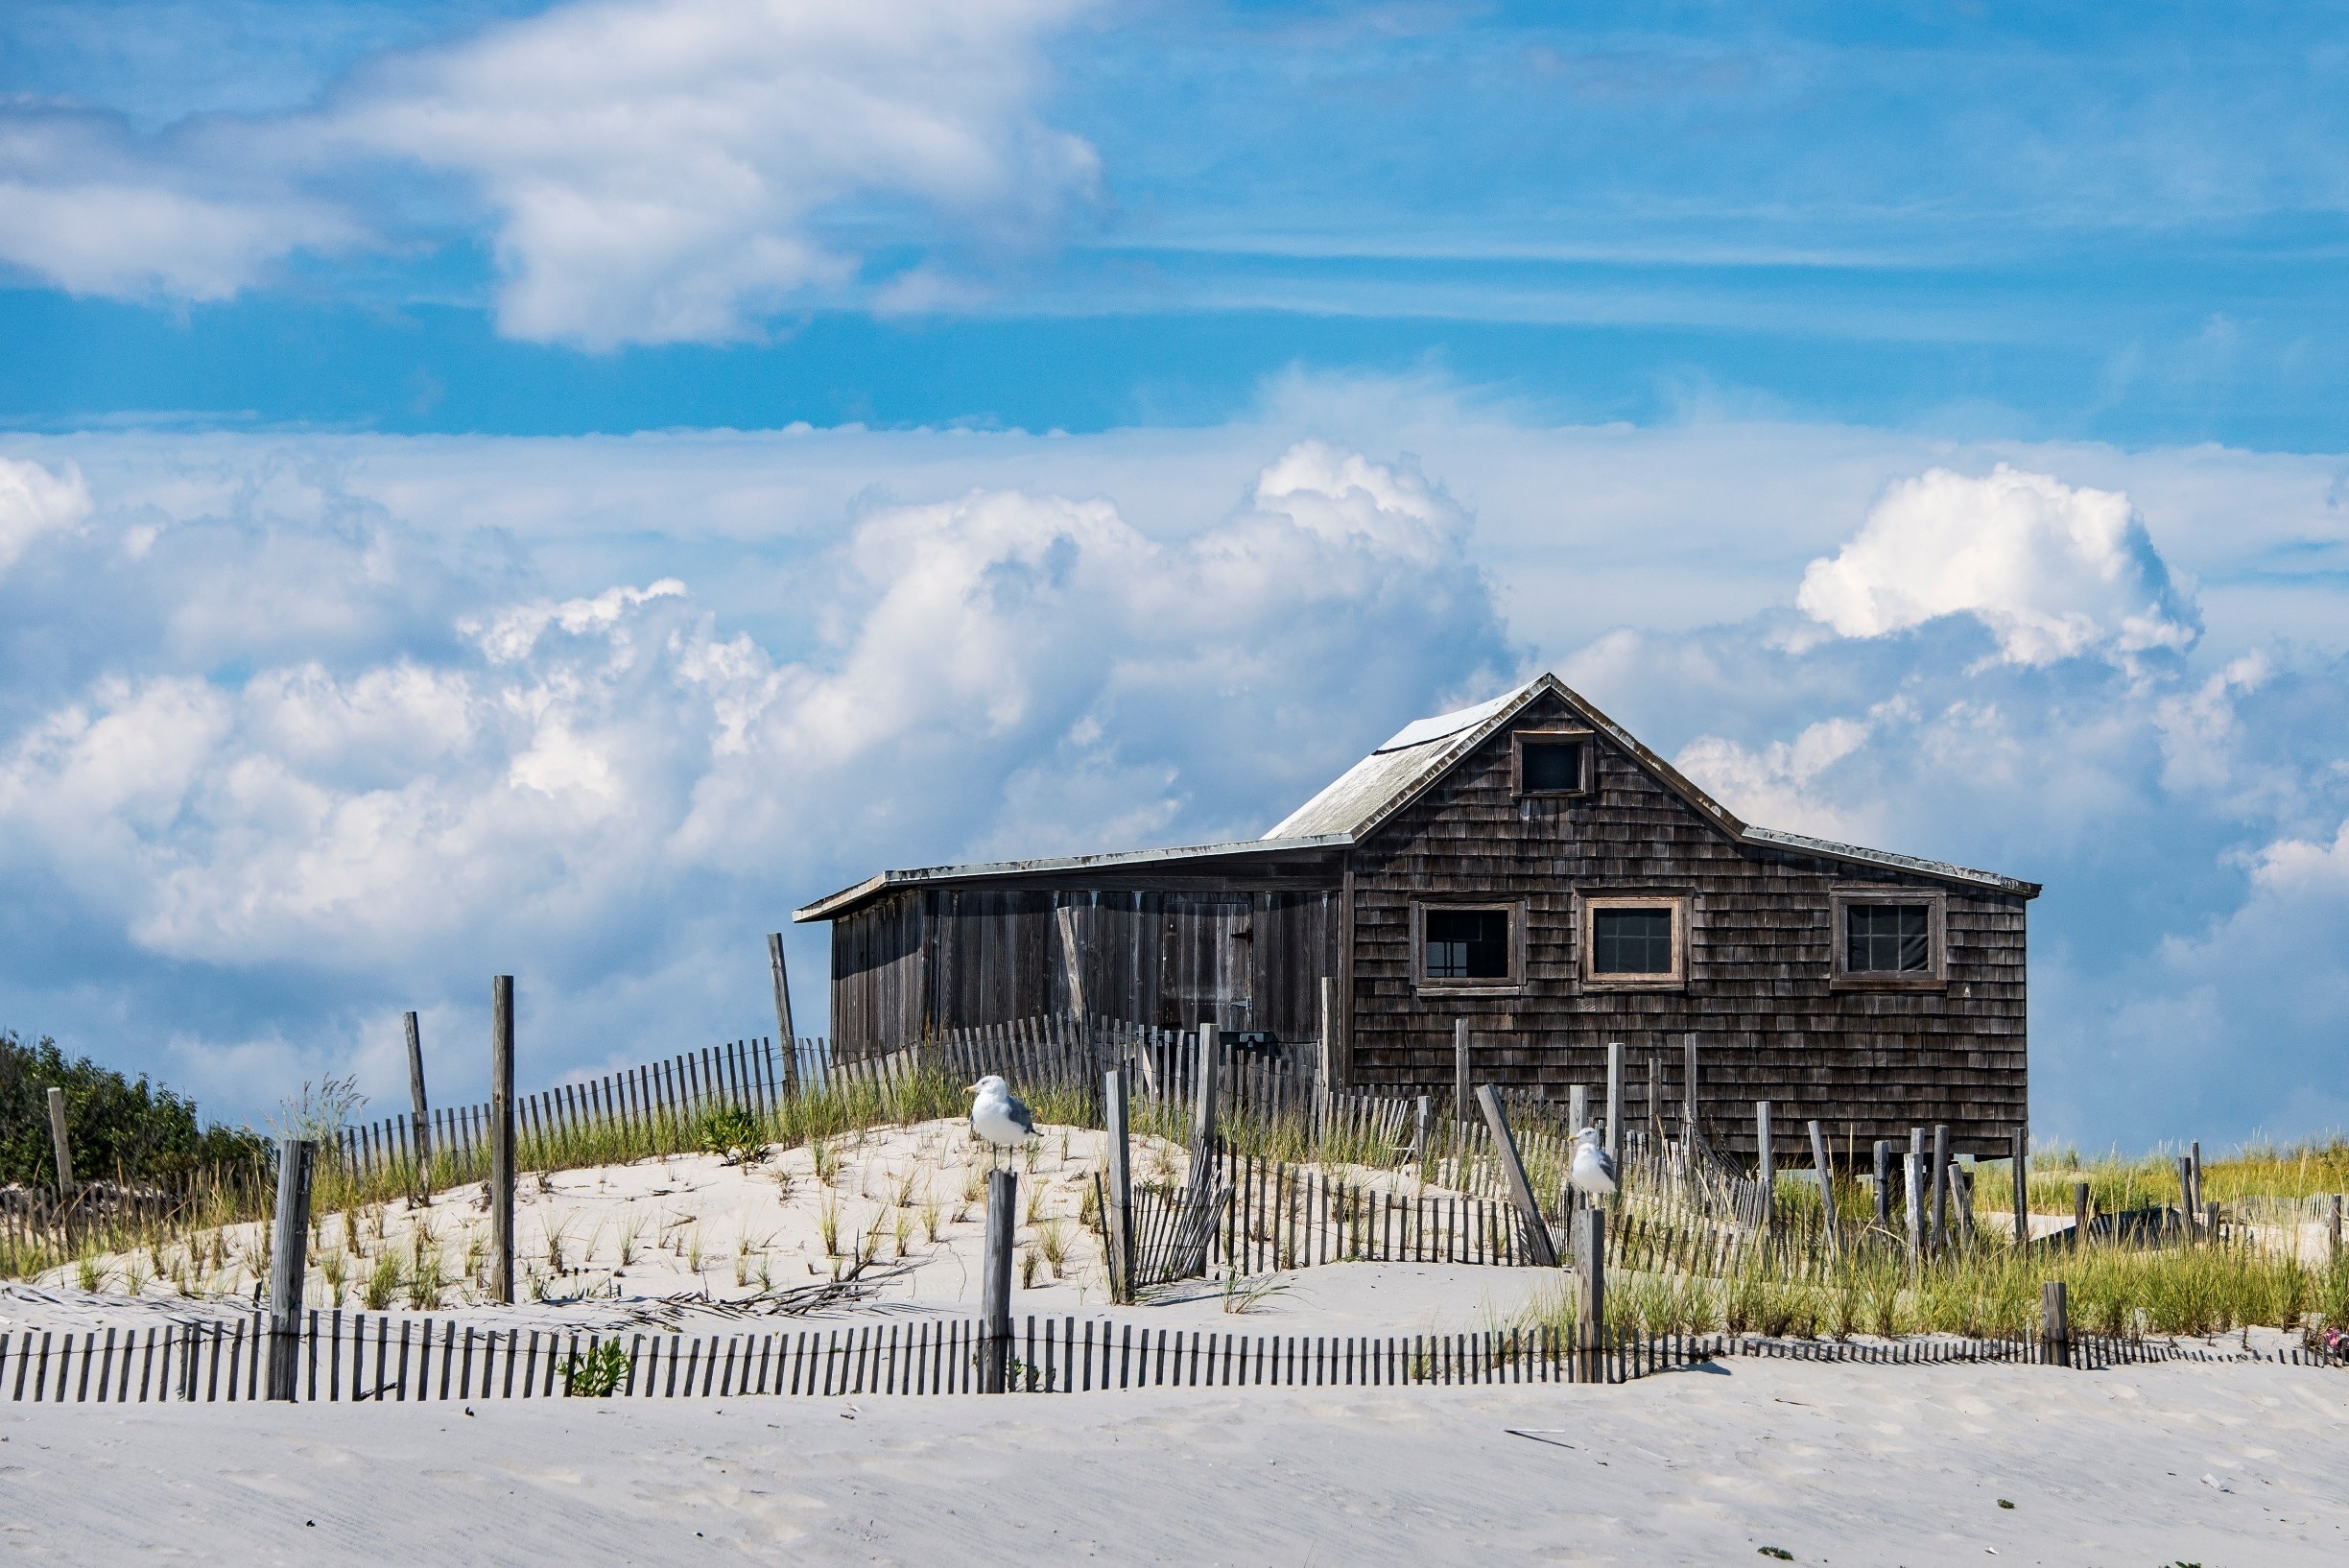 The Judge's Shack is located in Island Beach State Park (IBSP) - New Jersey. IBSP is a beach preserve filled with rolling sand dunes and beautiful wildlife. This Shack was used as a summer vacation getaway for Judge Richard Hartshorne and his family since the 1940's. #Parks #beach #dunes